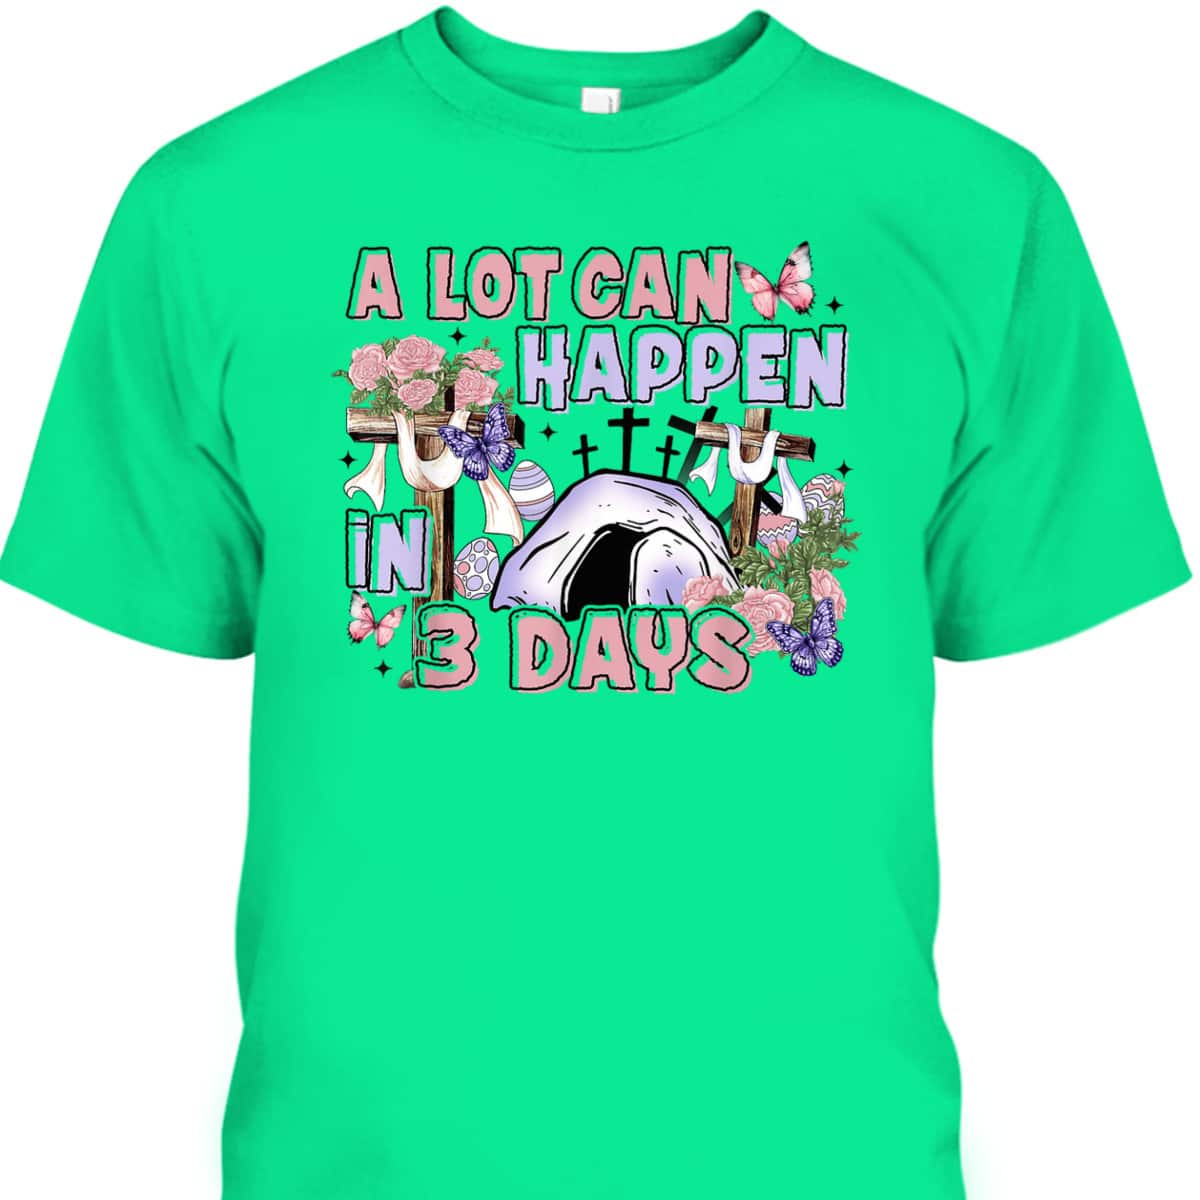 A Lot Can Happen In 3 Days Floral Cross Christian Easter Day T-Shirt